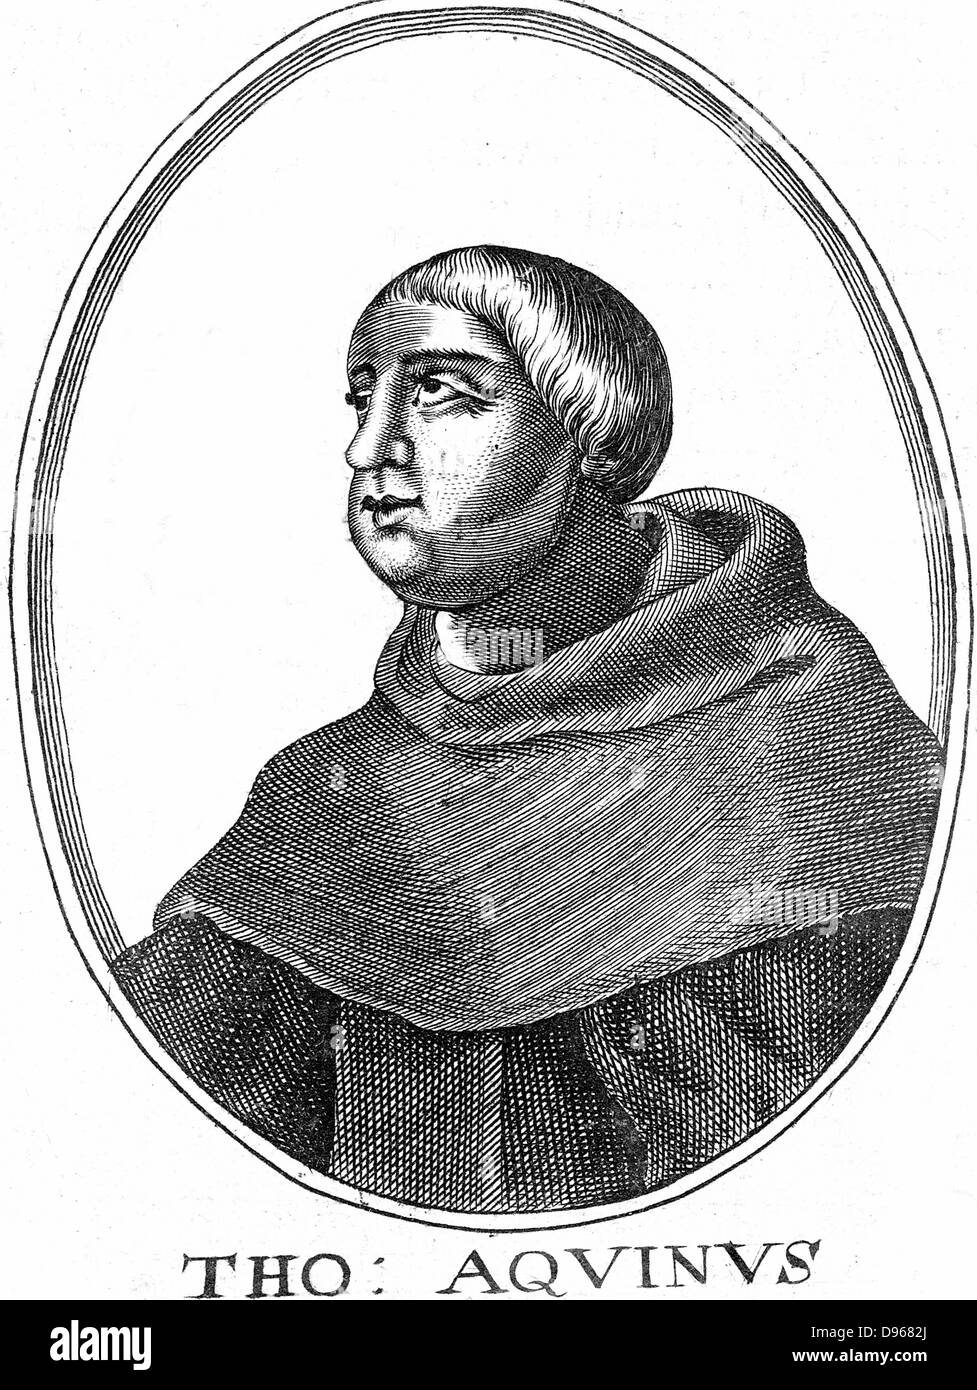 St Thomas Aquinas (c1225-1274) Italian philosopher and theologian; joined Dominican order (Black-friars); studied under Albertus Magnus at Cologne; wrote commentaries on Aristotle. Copperplate engraving Stock Photo